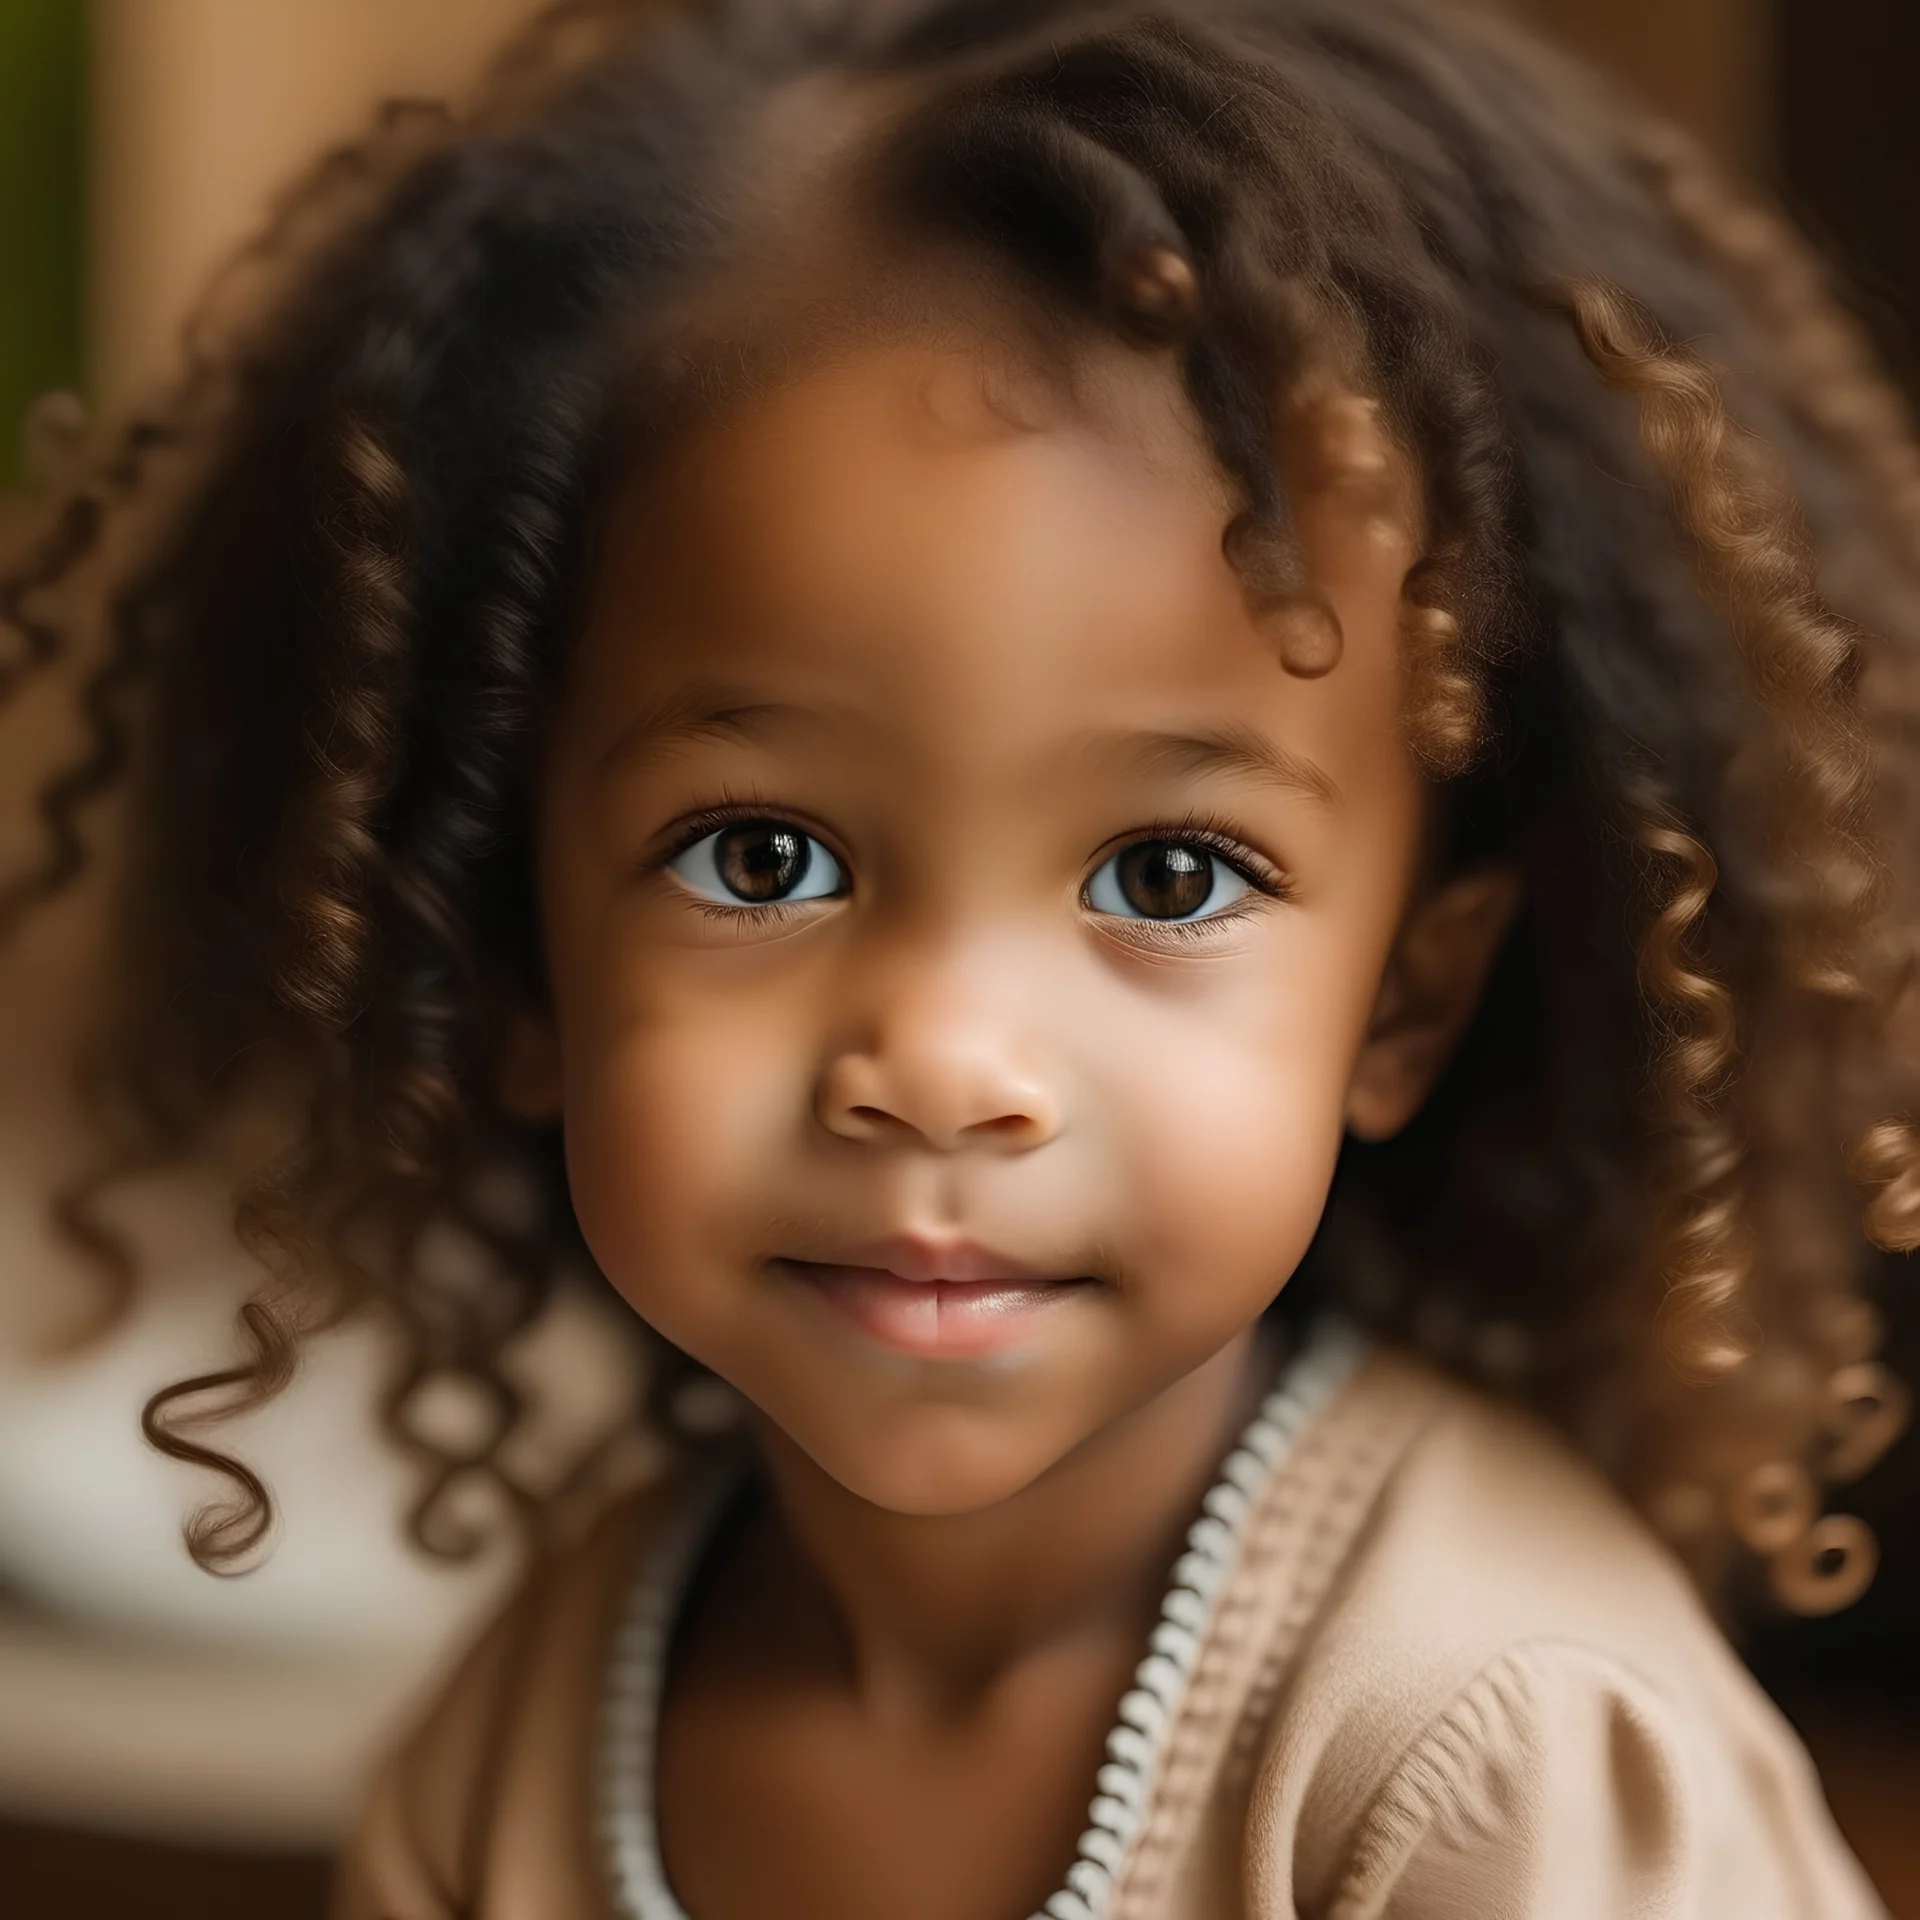 Portrait of a cute little african american girl with curly hair